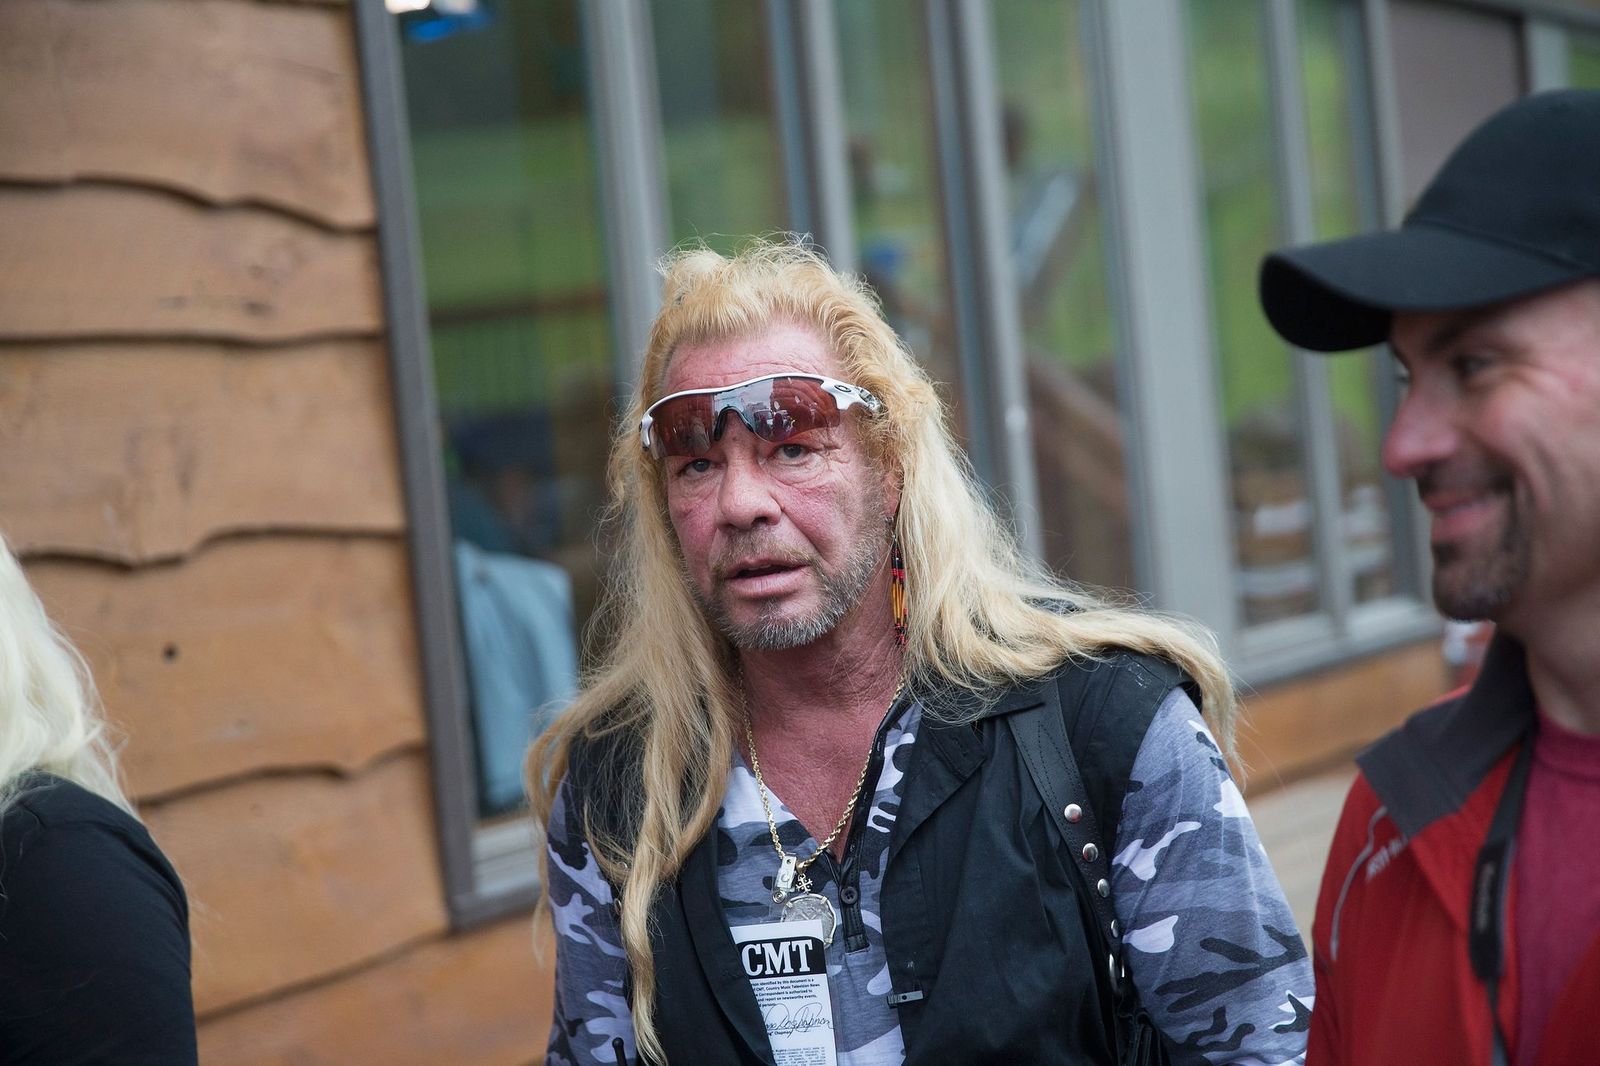 Duane Chapman films a segment of "Dog the Bounty Hunter" outside of a news conference on June 28, 2015, in Malone, New York | Photo: Scott Olson/Getty Images